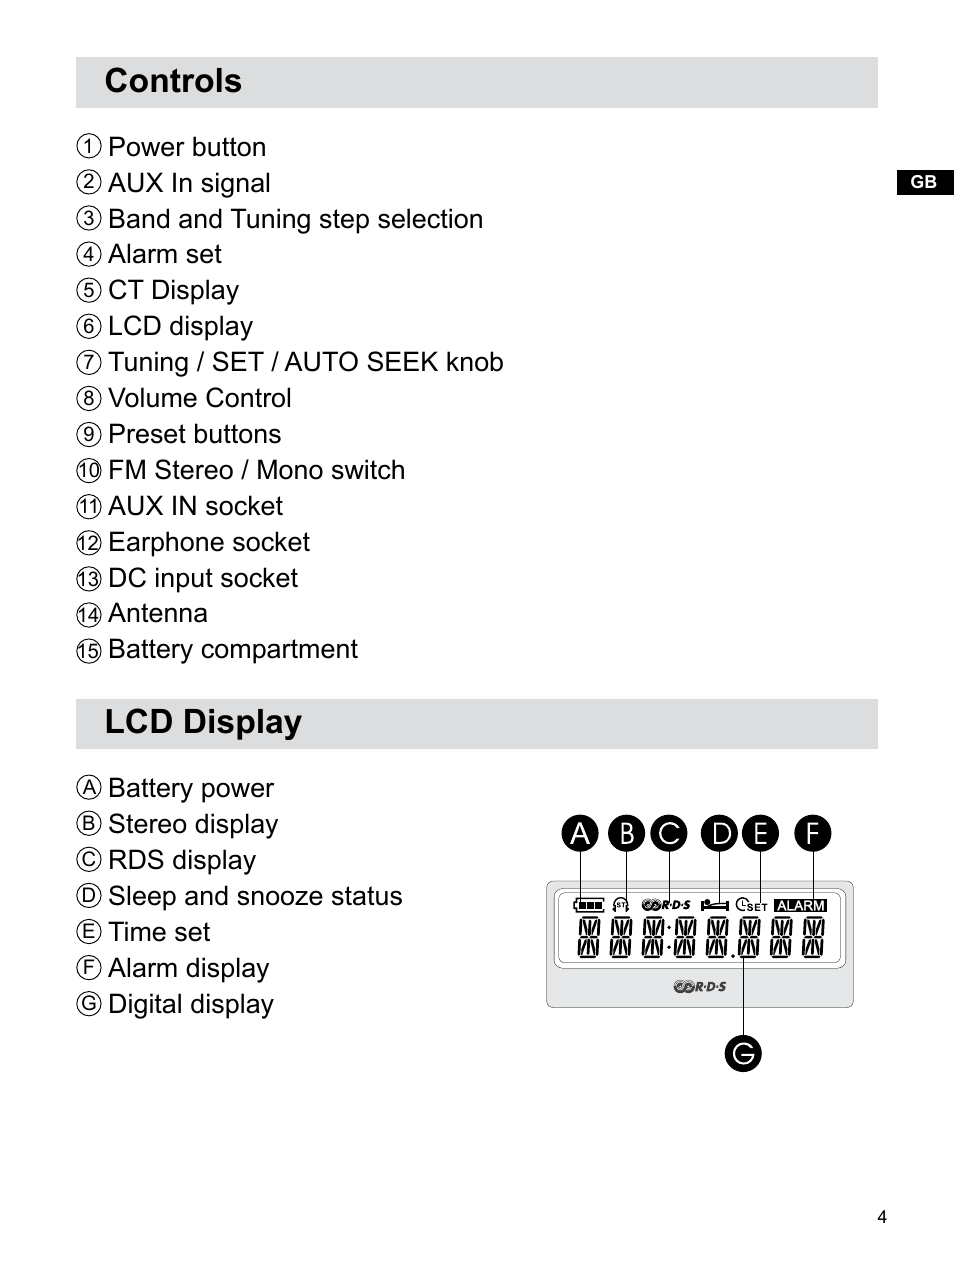 Controls, Lcd display | Sangean Package PR-D5 (V1) User Manual | Page 5